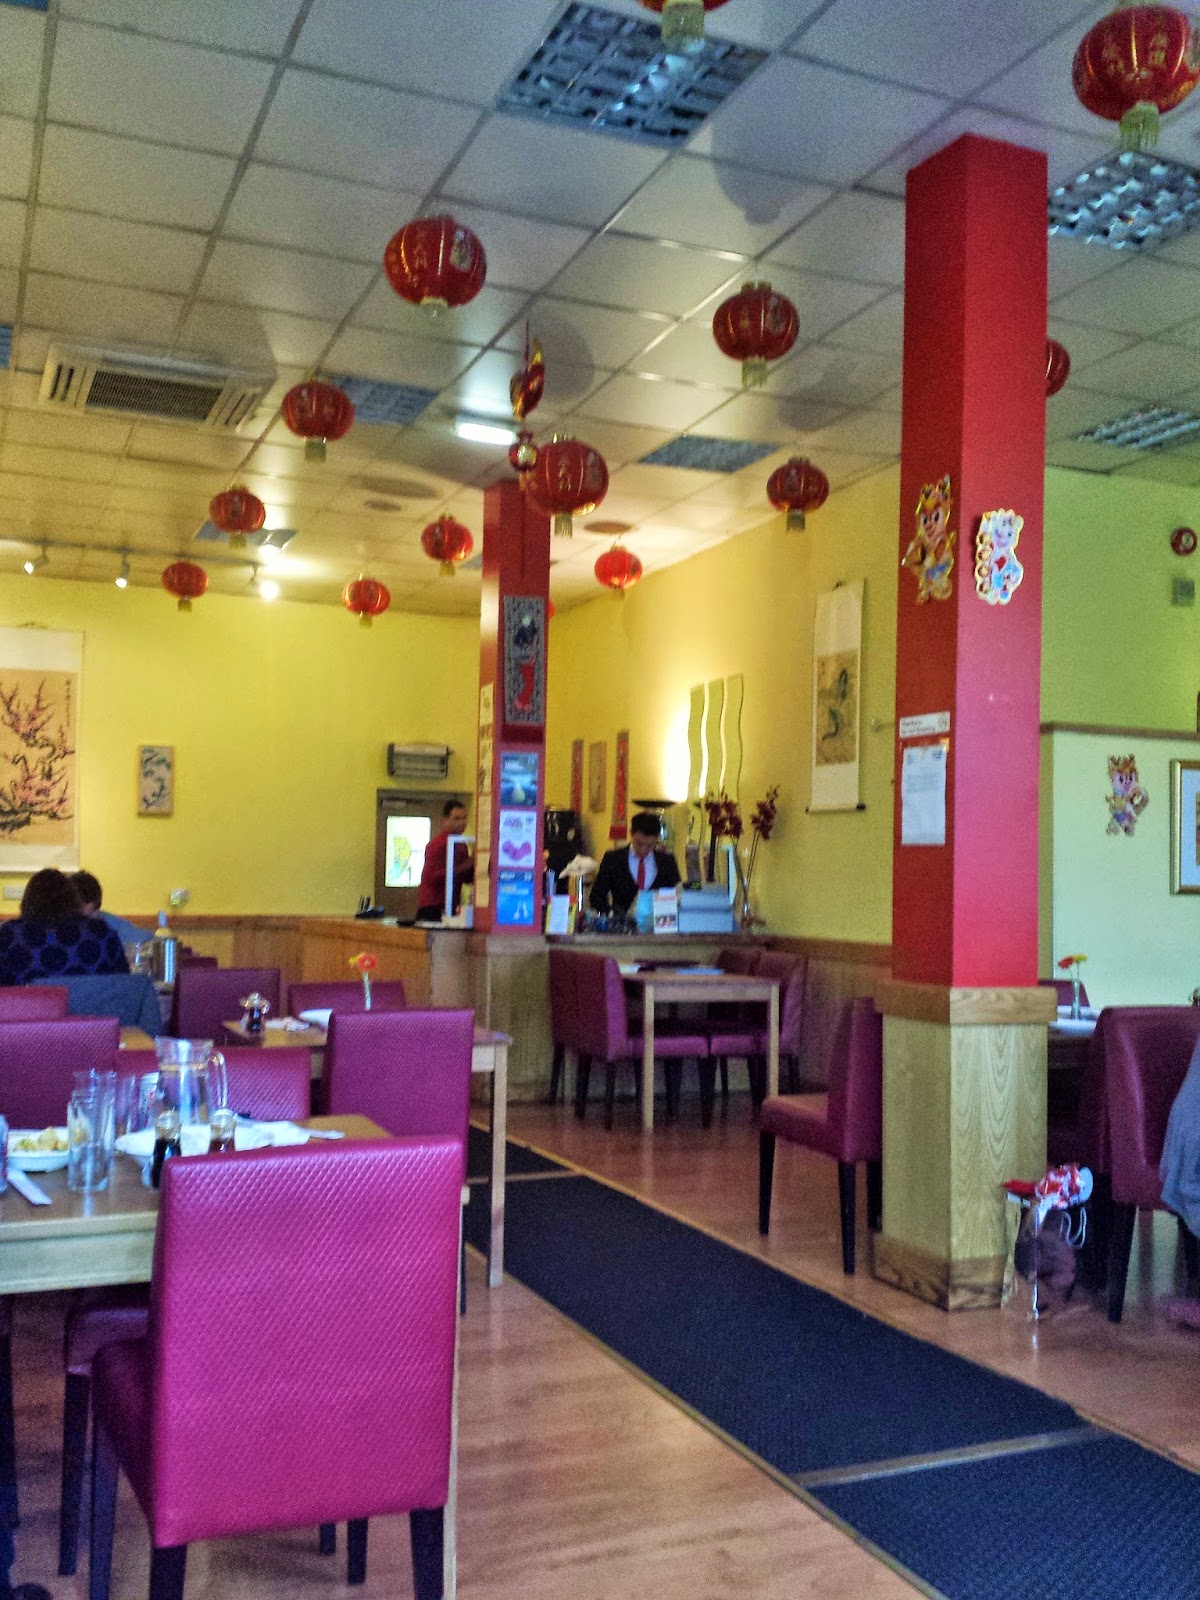 Chop Chop - An Authentic Chinese Restaurant in Edinburgh - Tinned Tomatoes